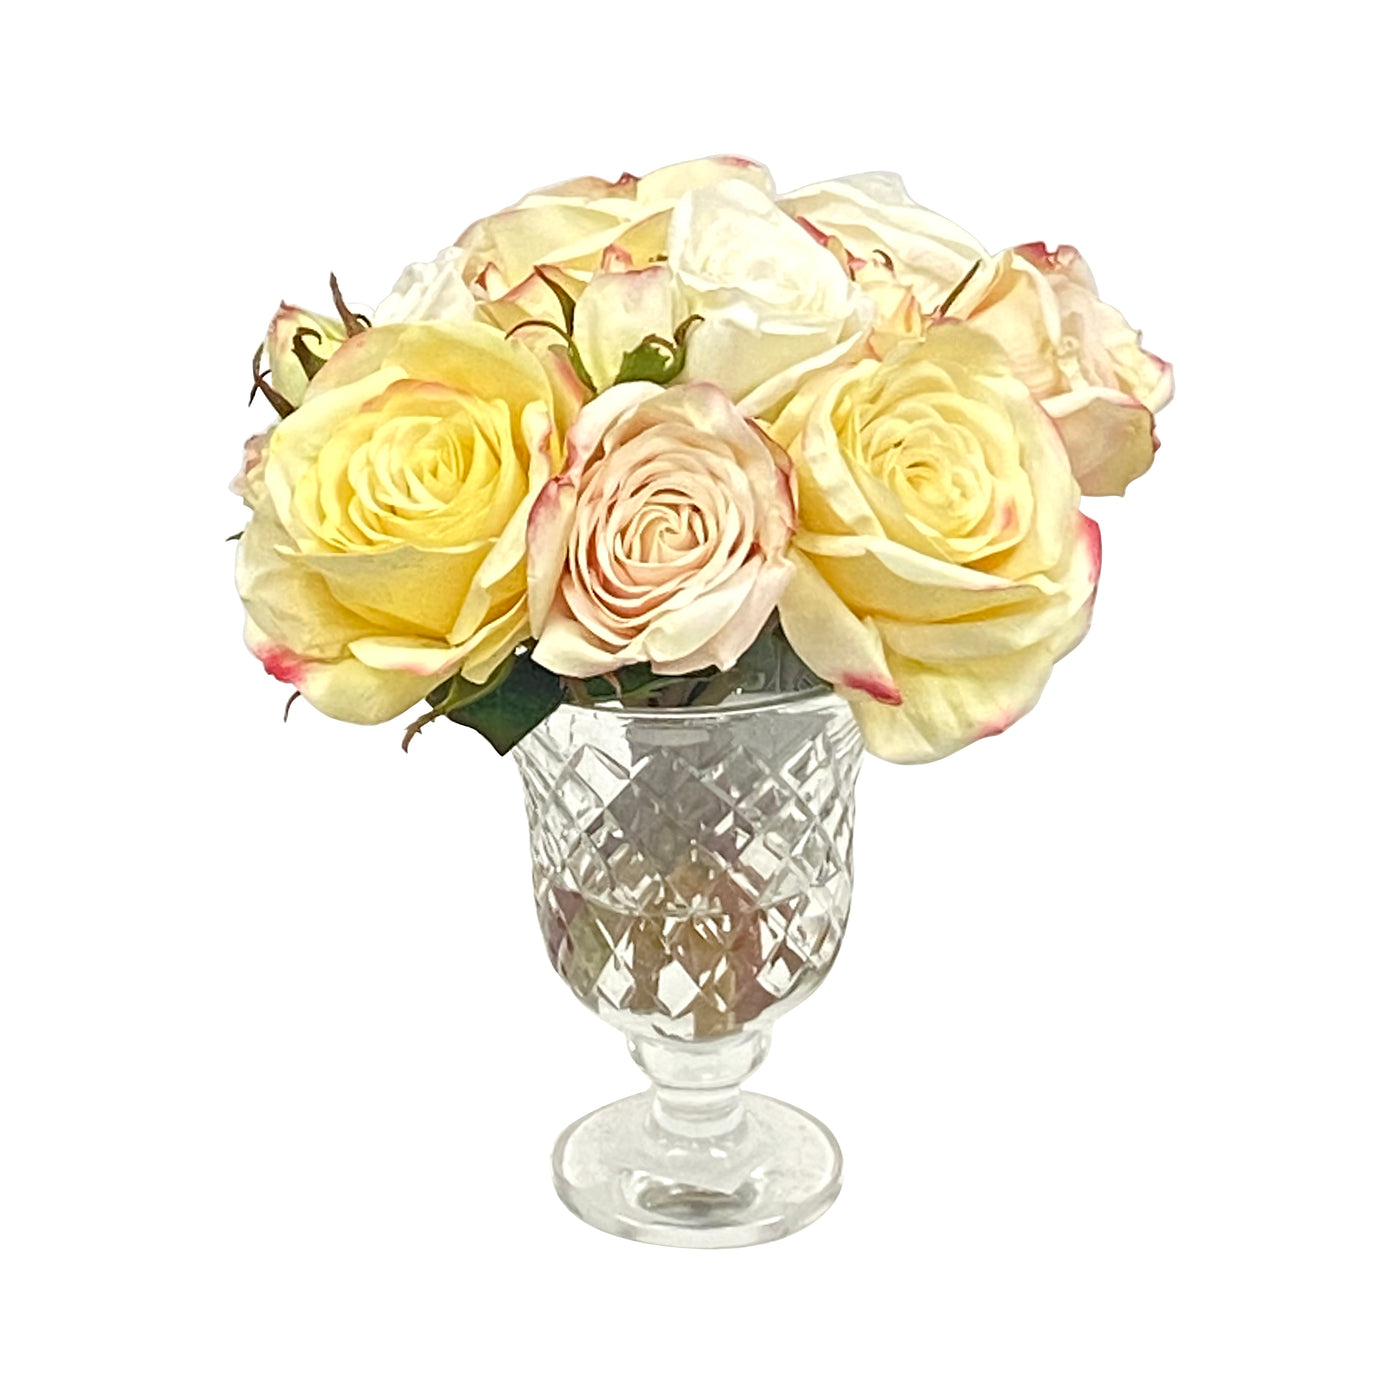 Realistic mixed roses in high-quality clear cut glass urn